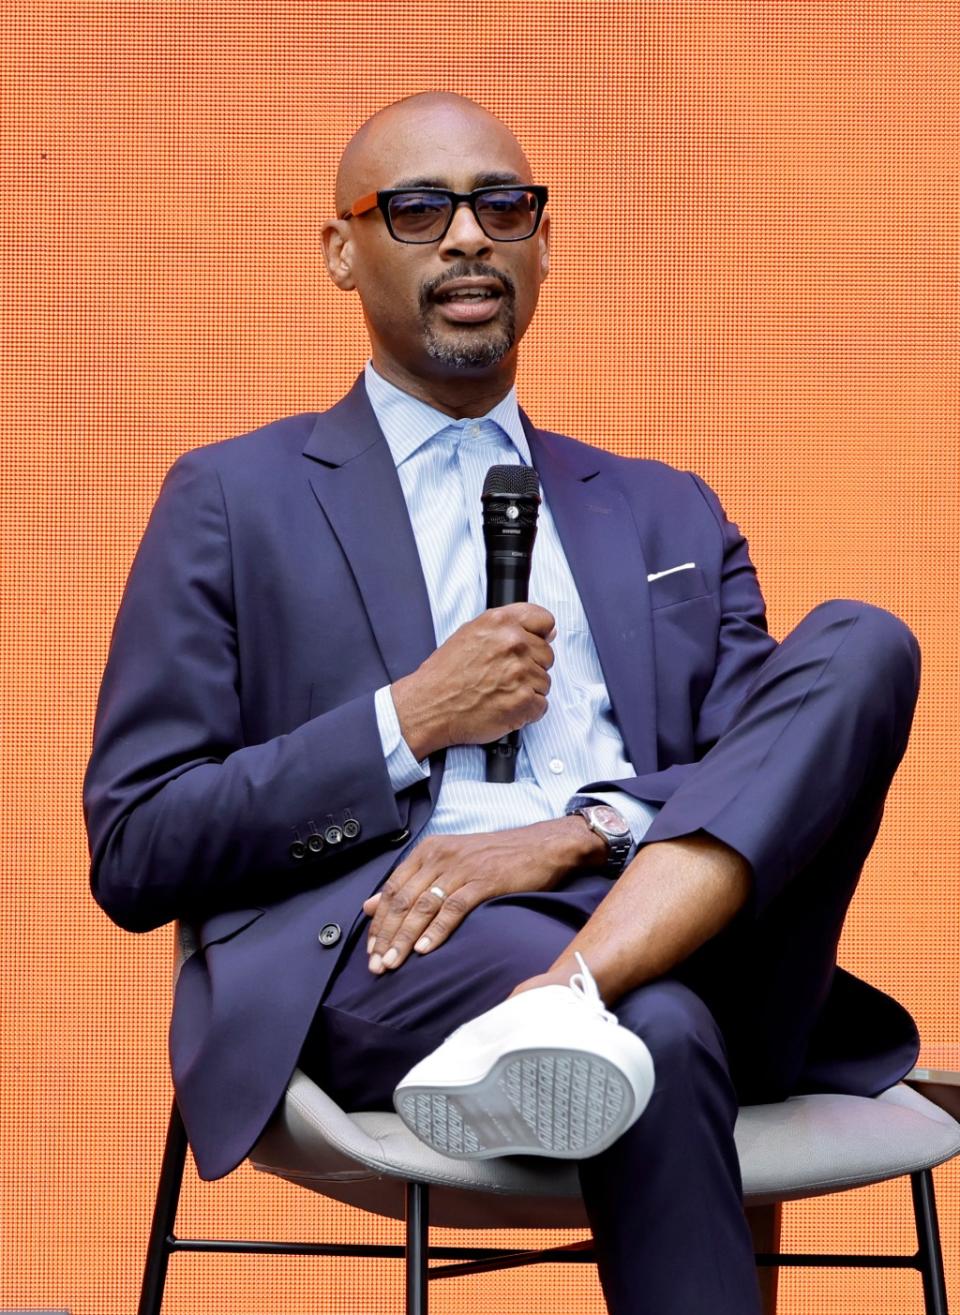 Founder & CEO of Macro Charles D. King speaks onstage during the “Entertainment & Social Impact — Changing the Narrative” segment at When We All Vote Inaugural Culture Of Democracy Summit on June 13, 2022 in Los Angeles, California. (Photo by Kevin Winter/Getty Images)